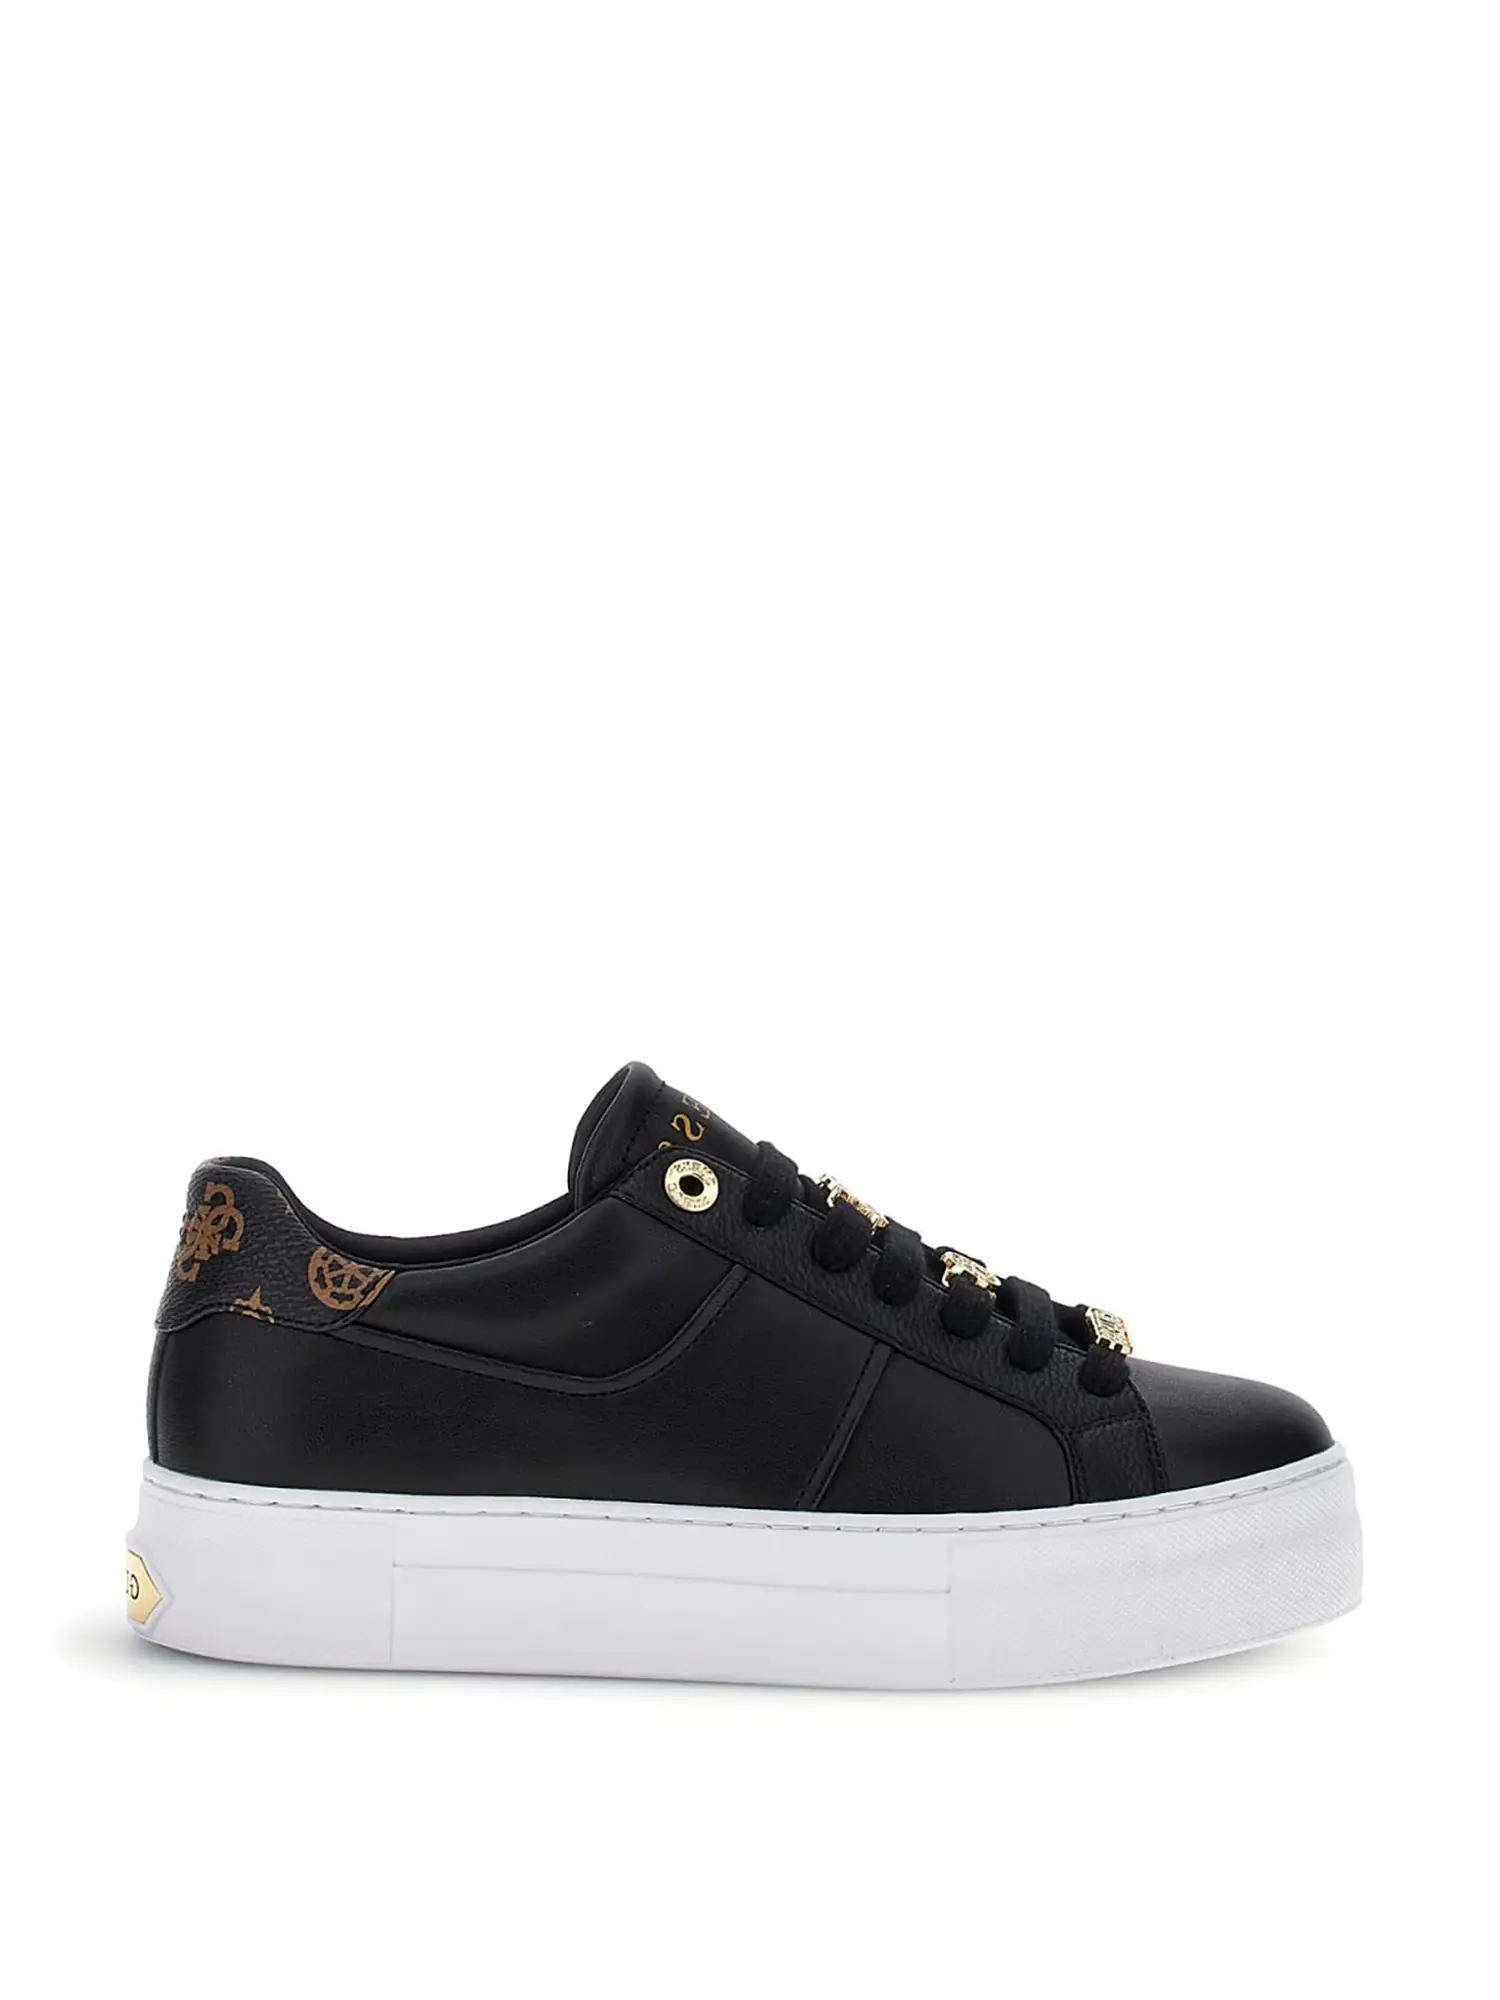 SNEAKERS DONNA - GUESS - FLJGIE ELE12 - NERO, 40